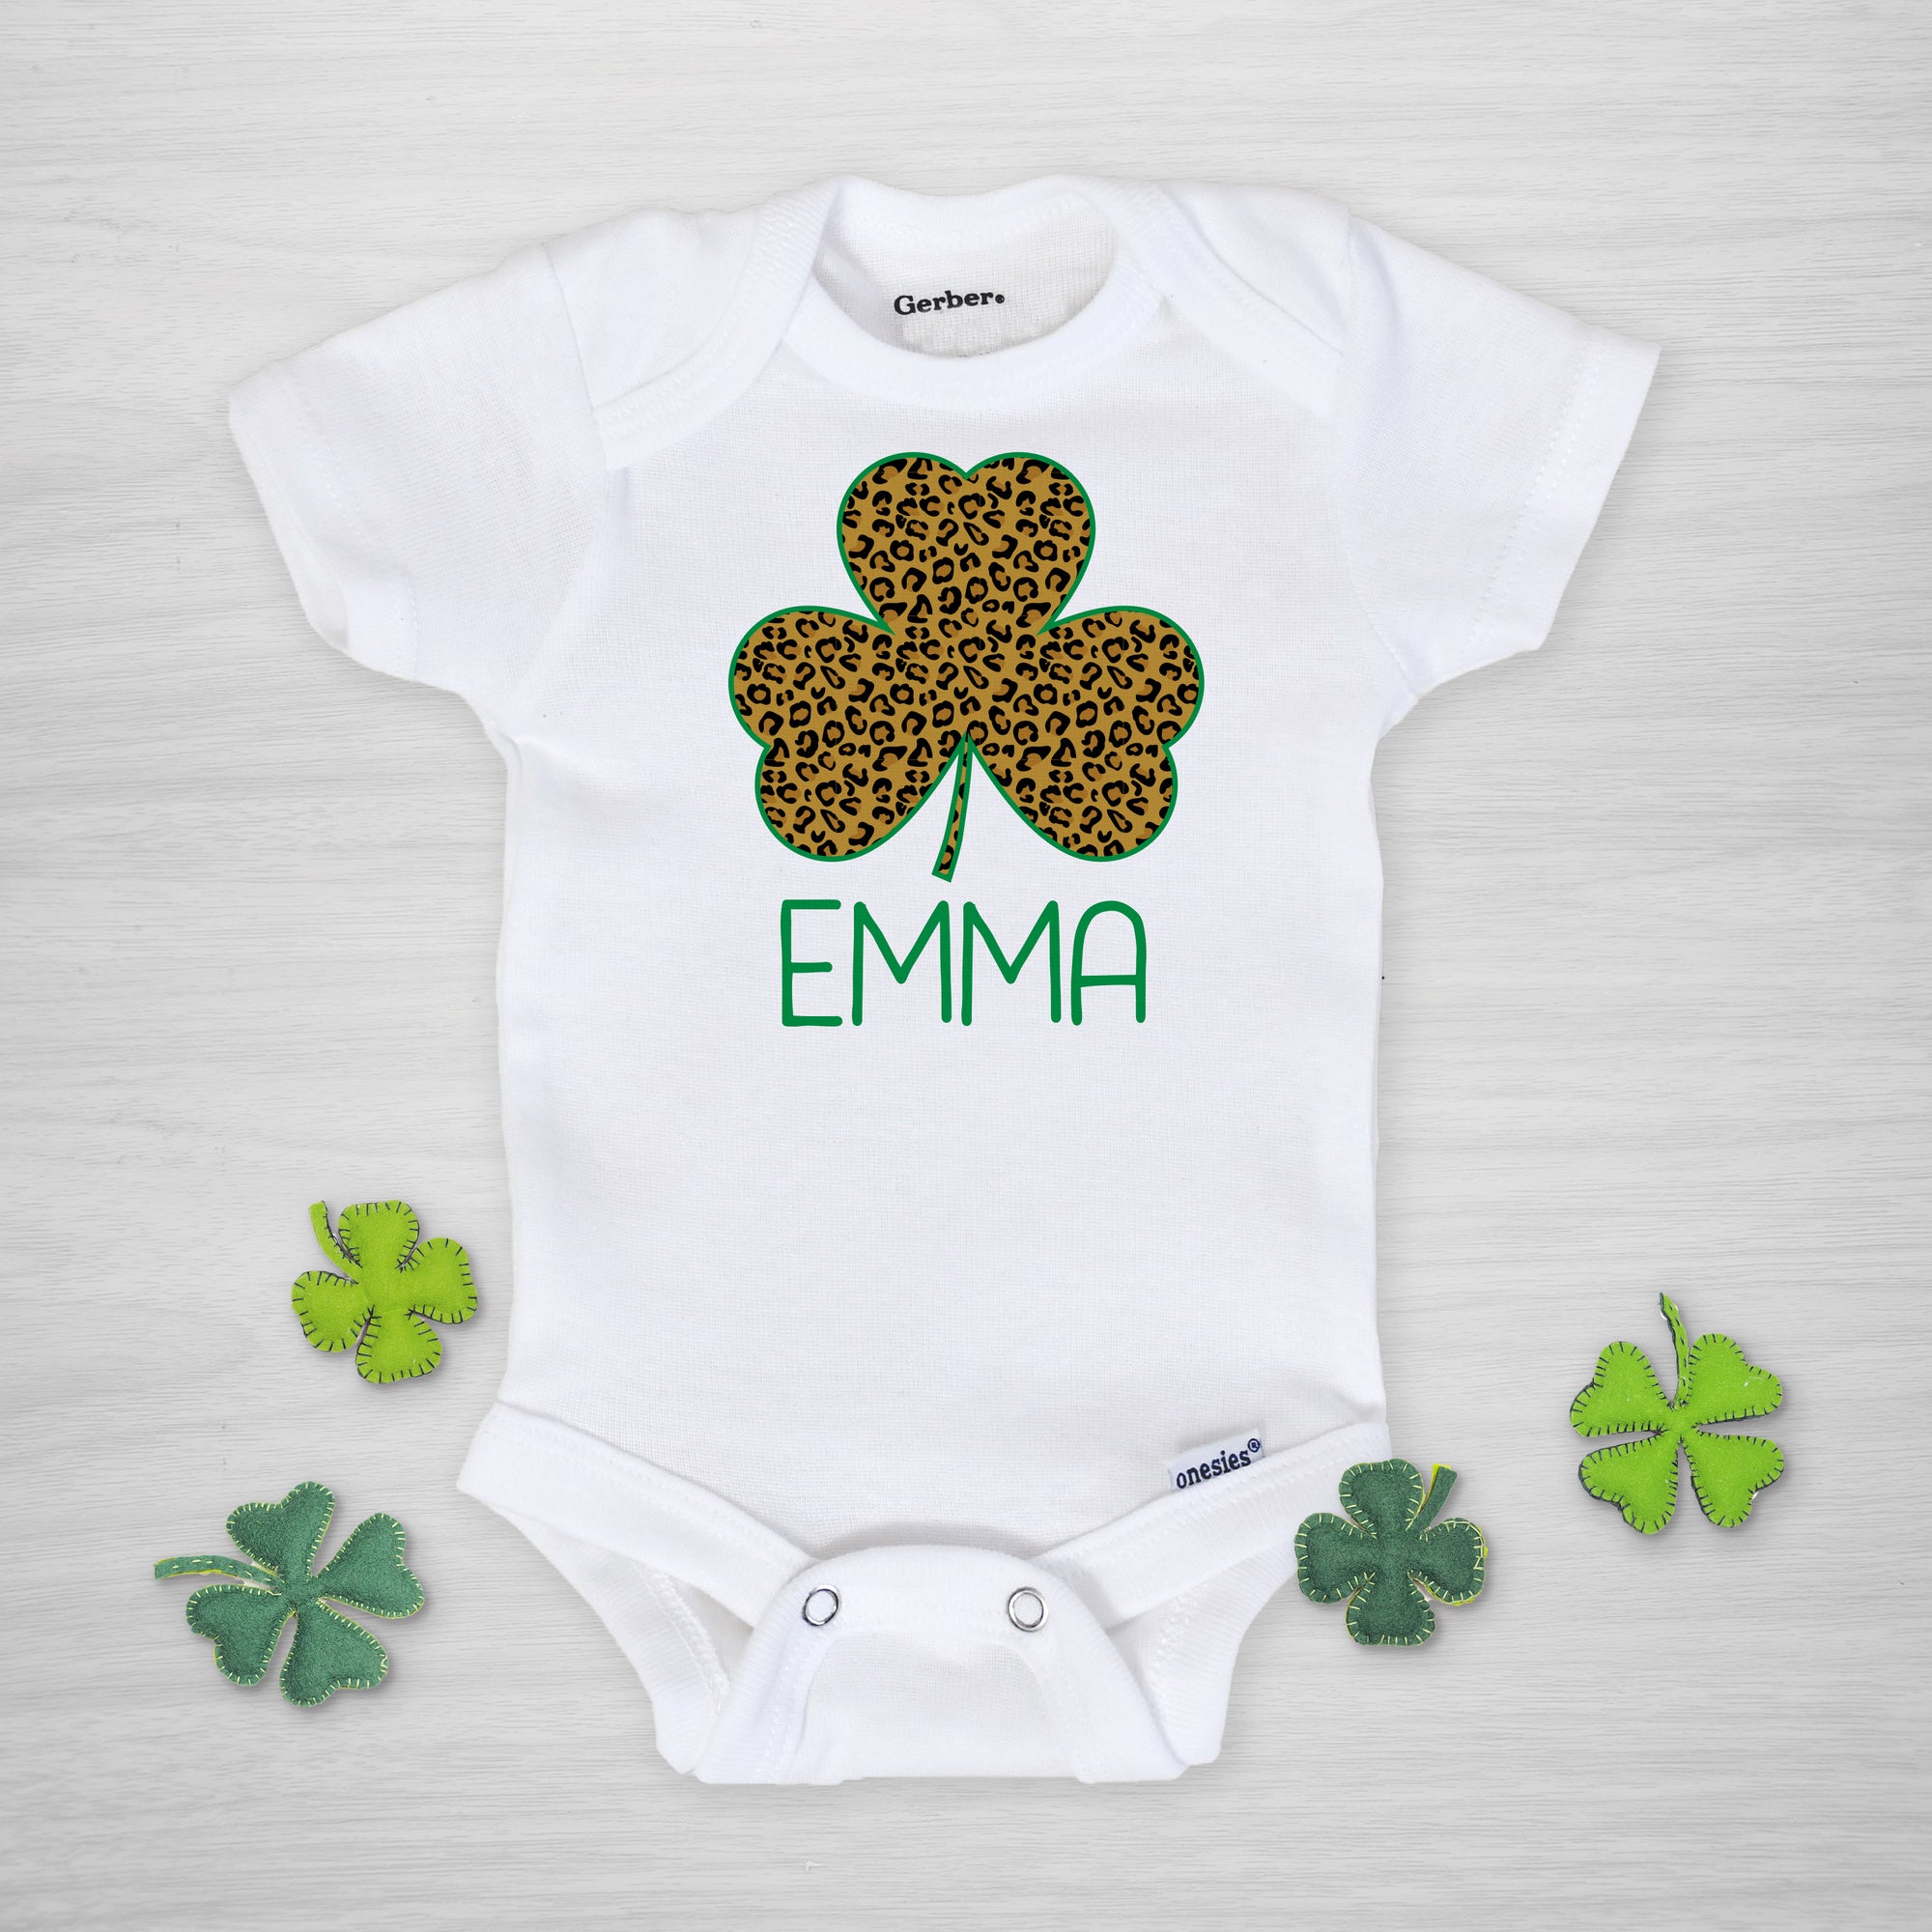 Leopard Print Shamrock Personalized Gerber Onesie for St. Patrick's Day, long sleeved